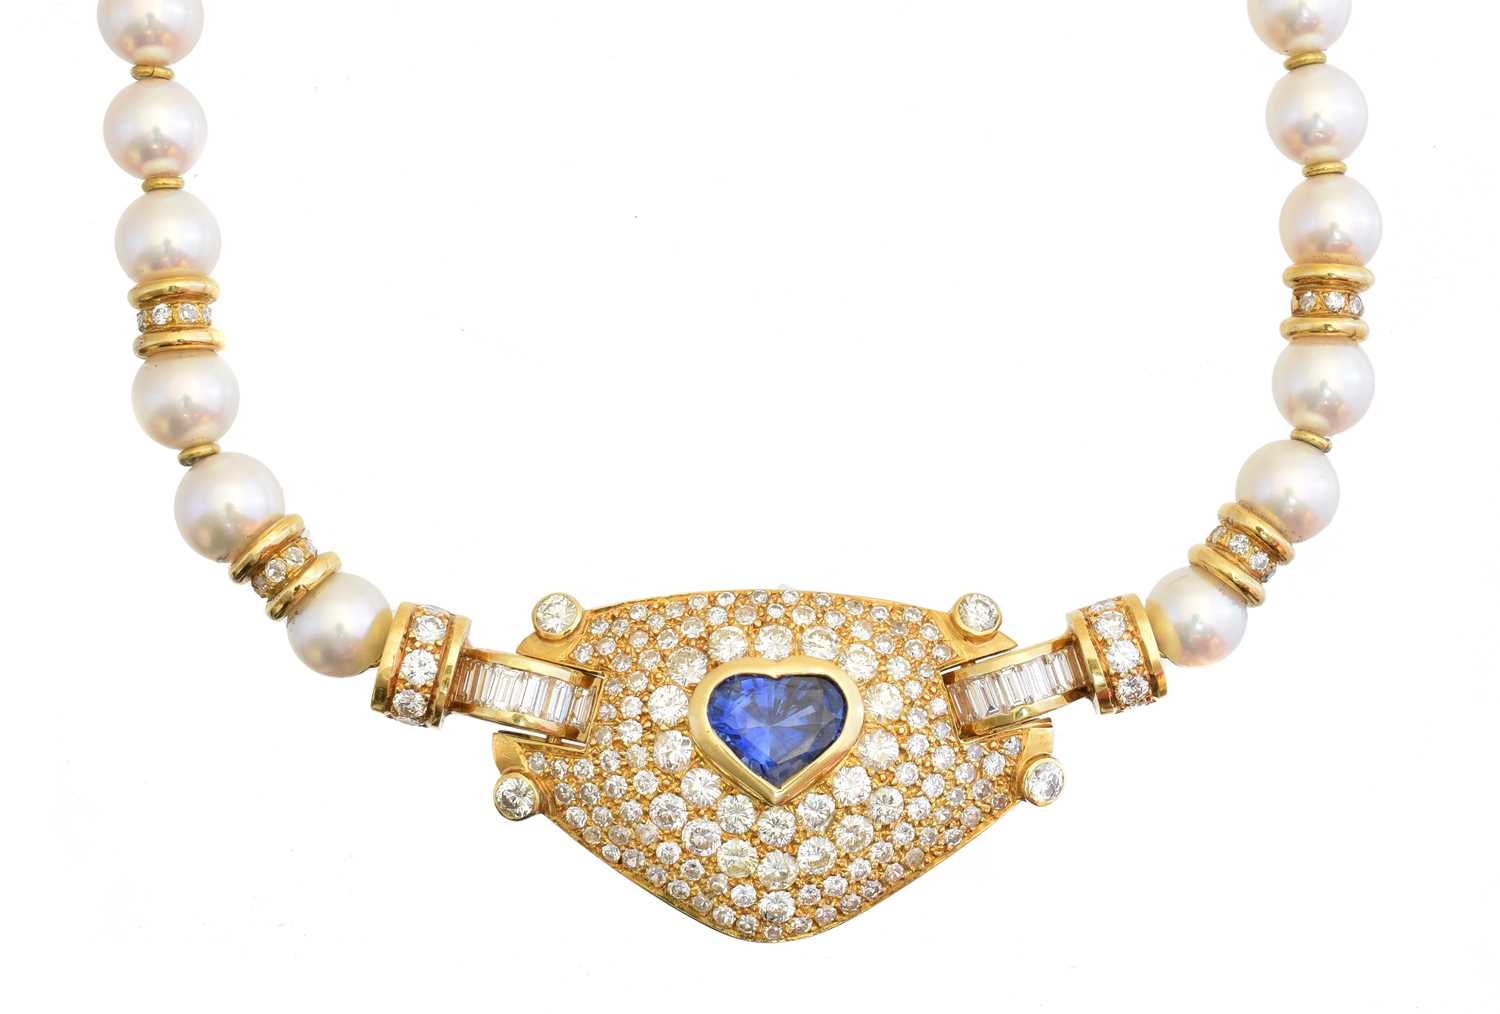 Adler sapphire diamond and cultured pearl necklace